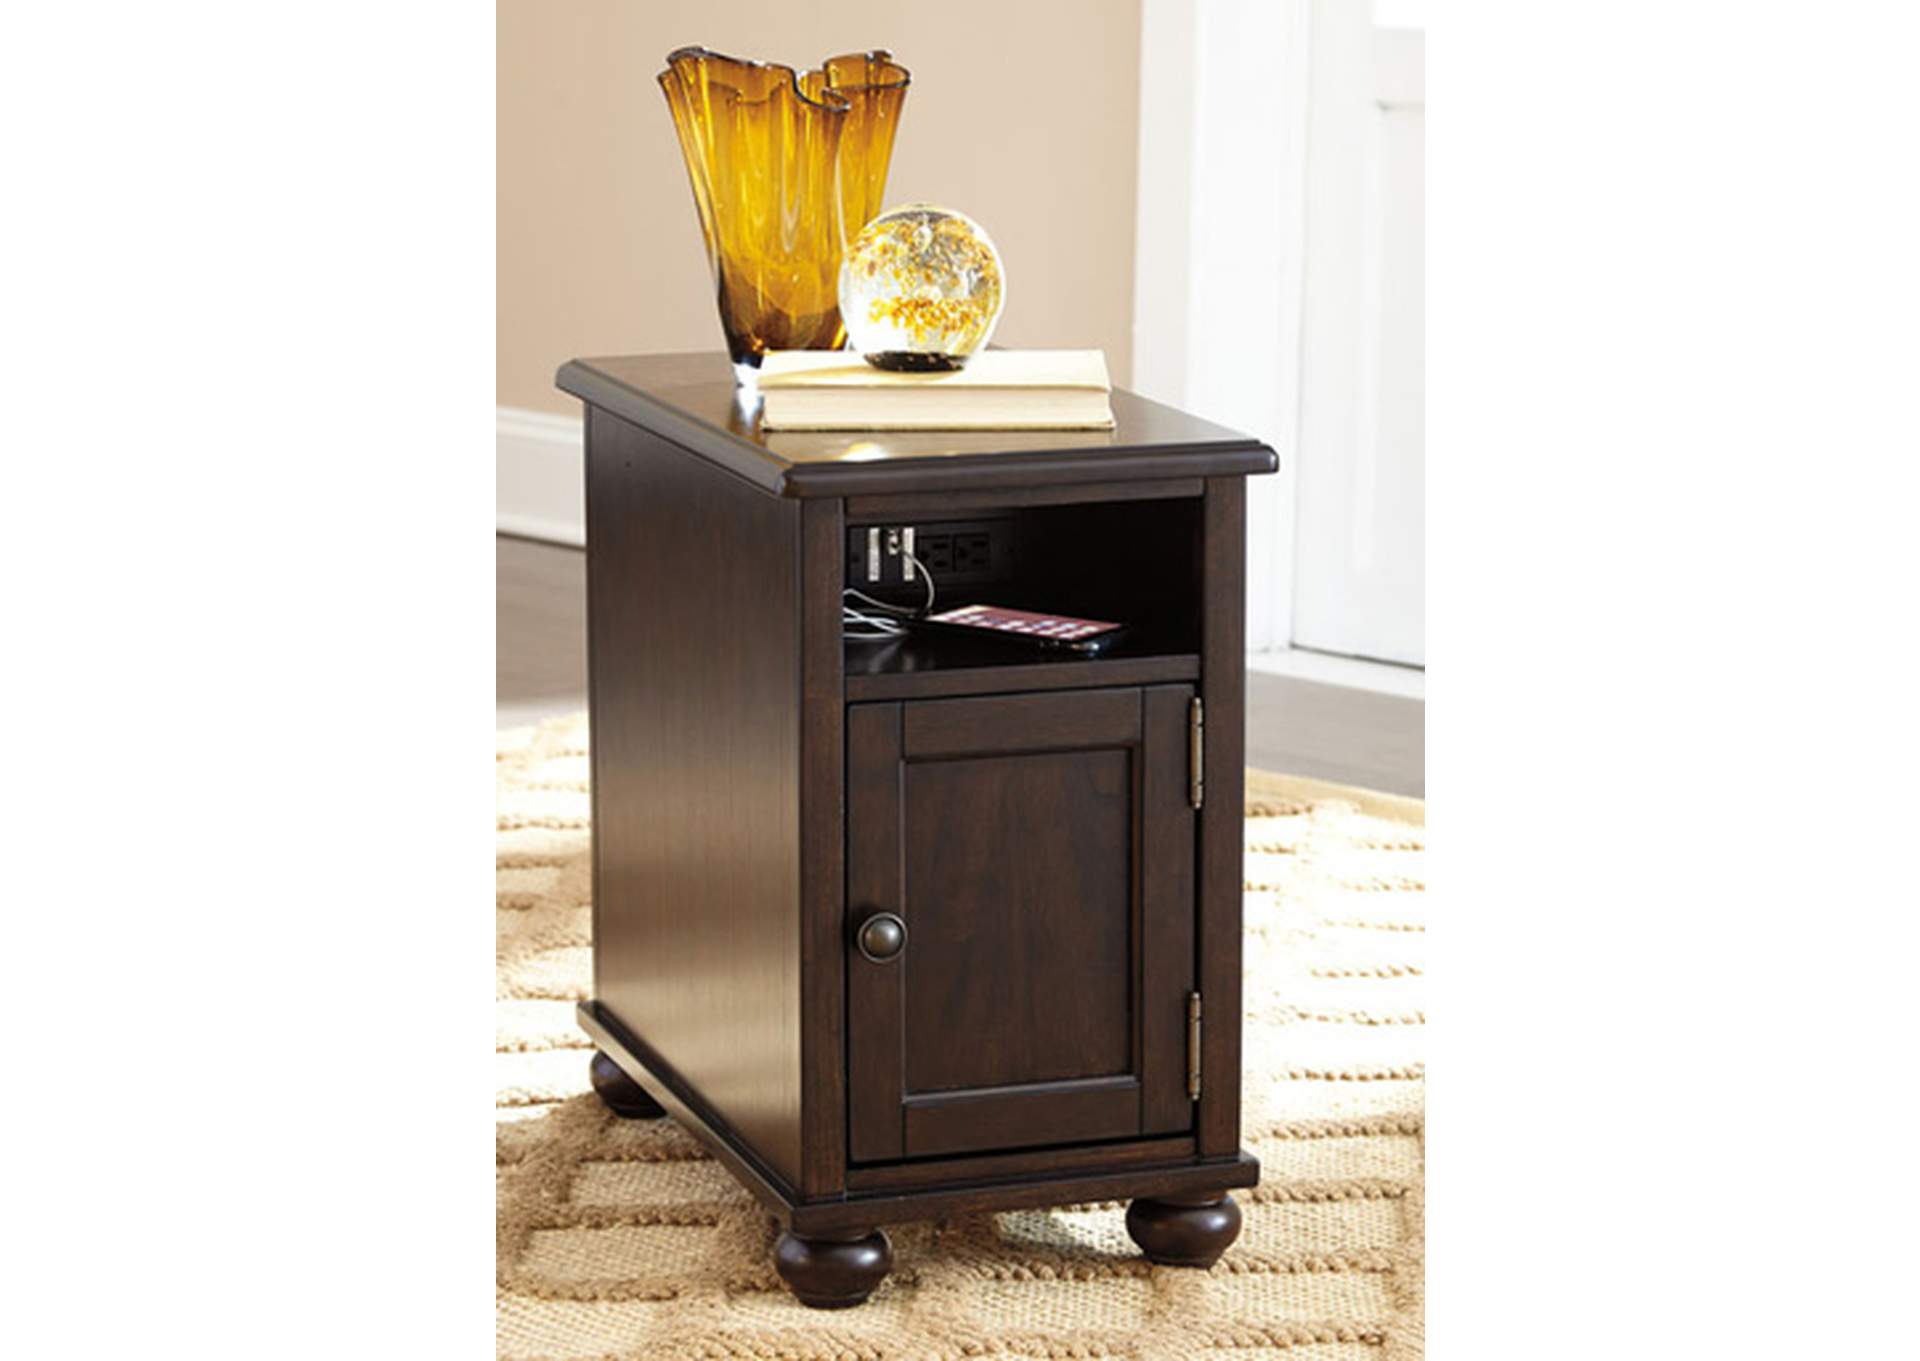 Barilanni Chairside End Table with USB Ports & Outlets,Signature Design By Ashley